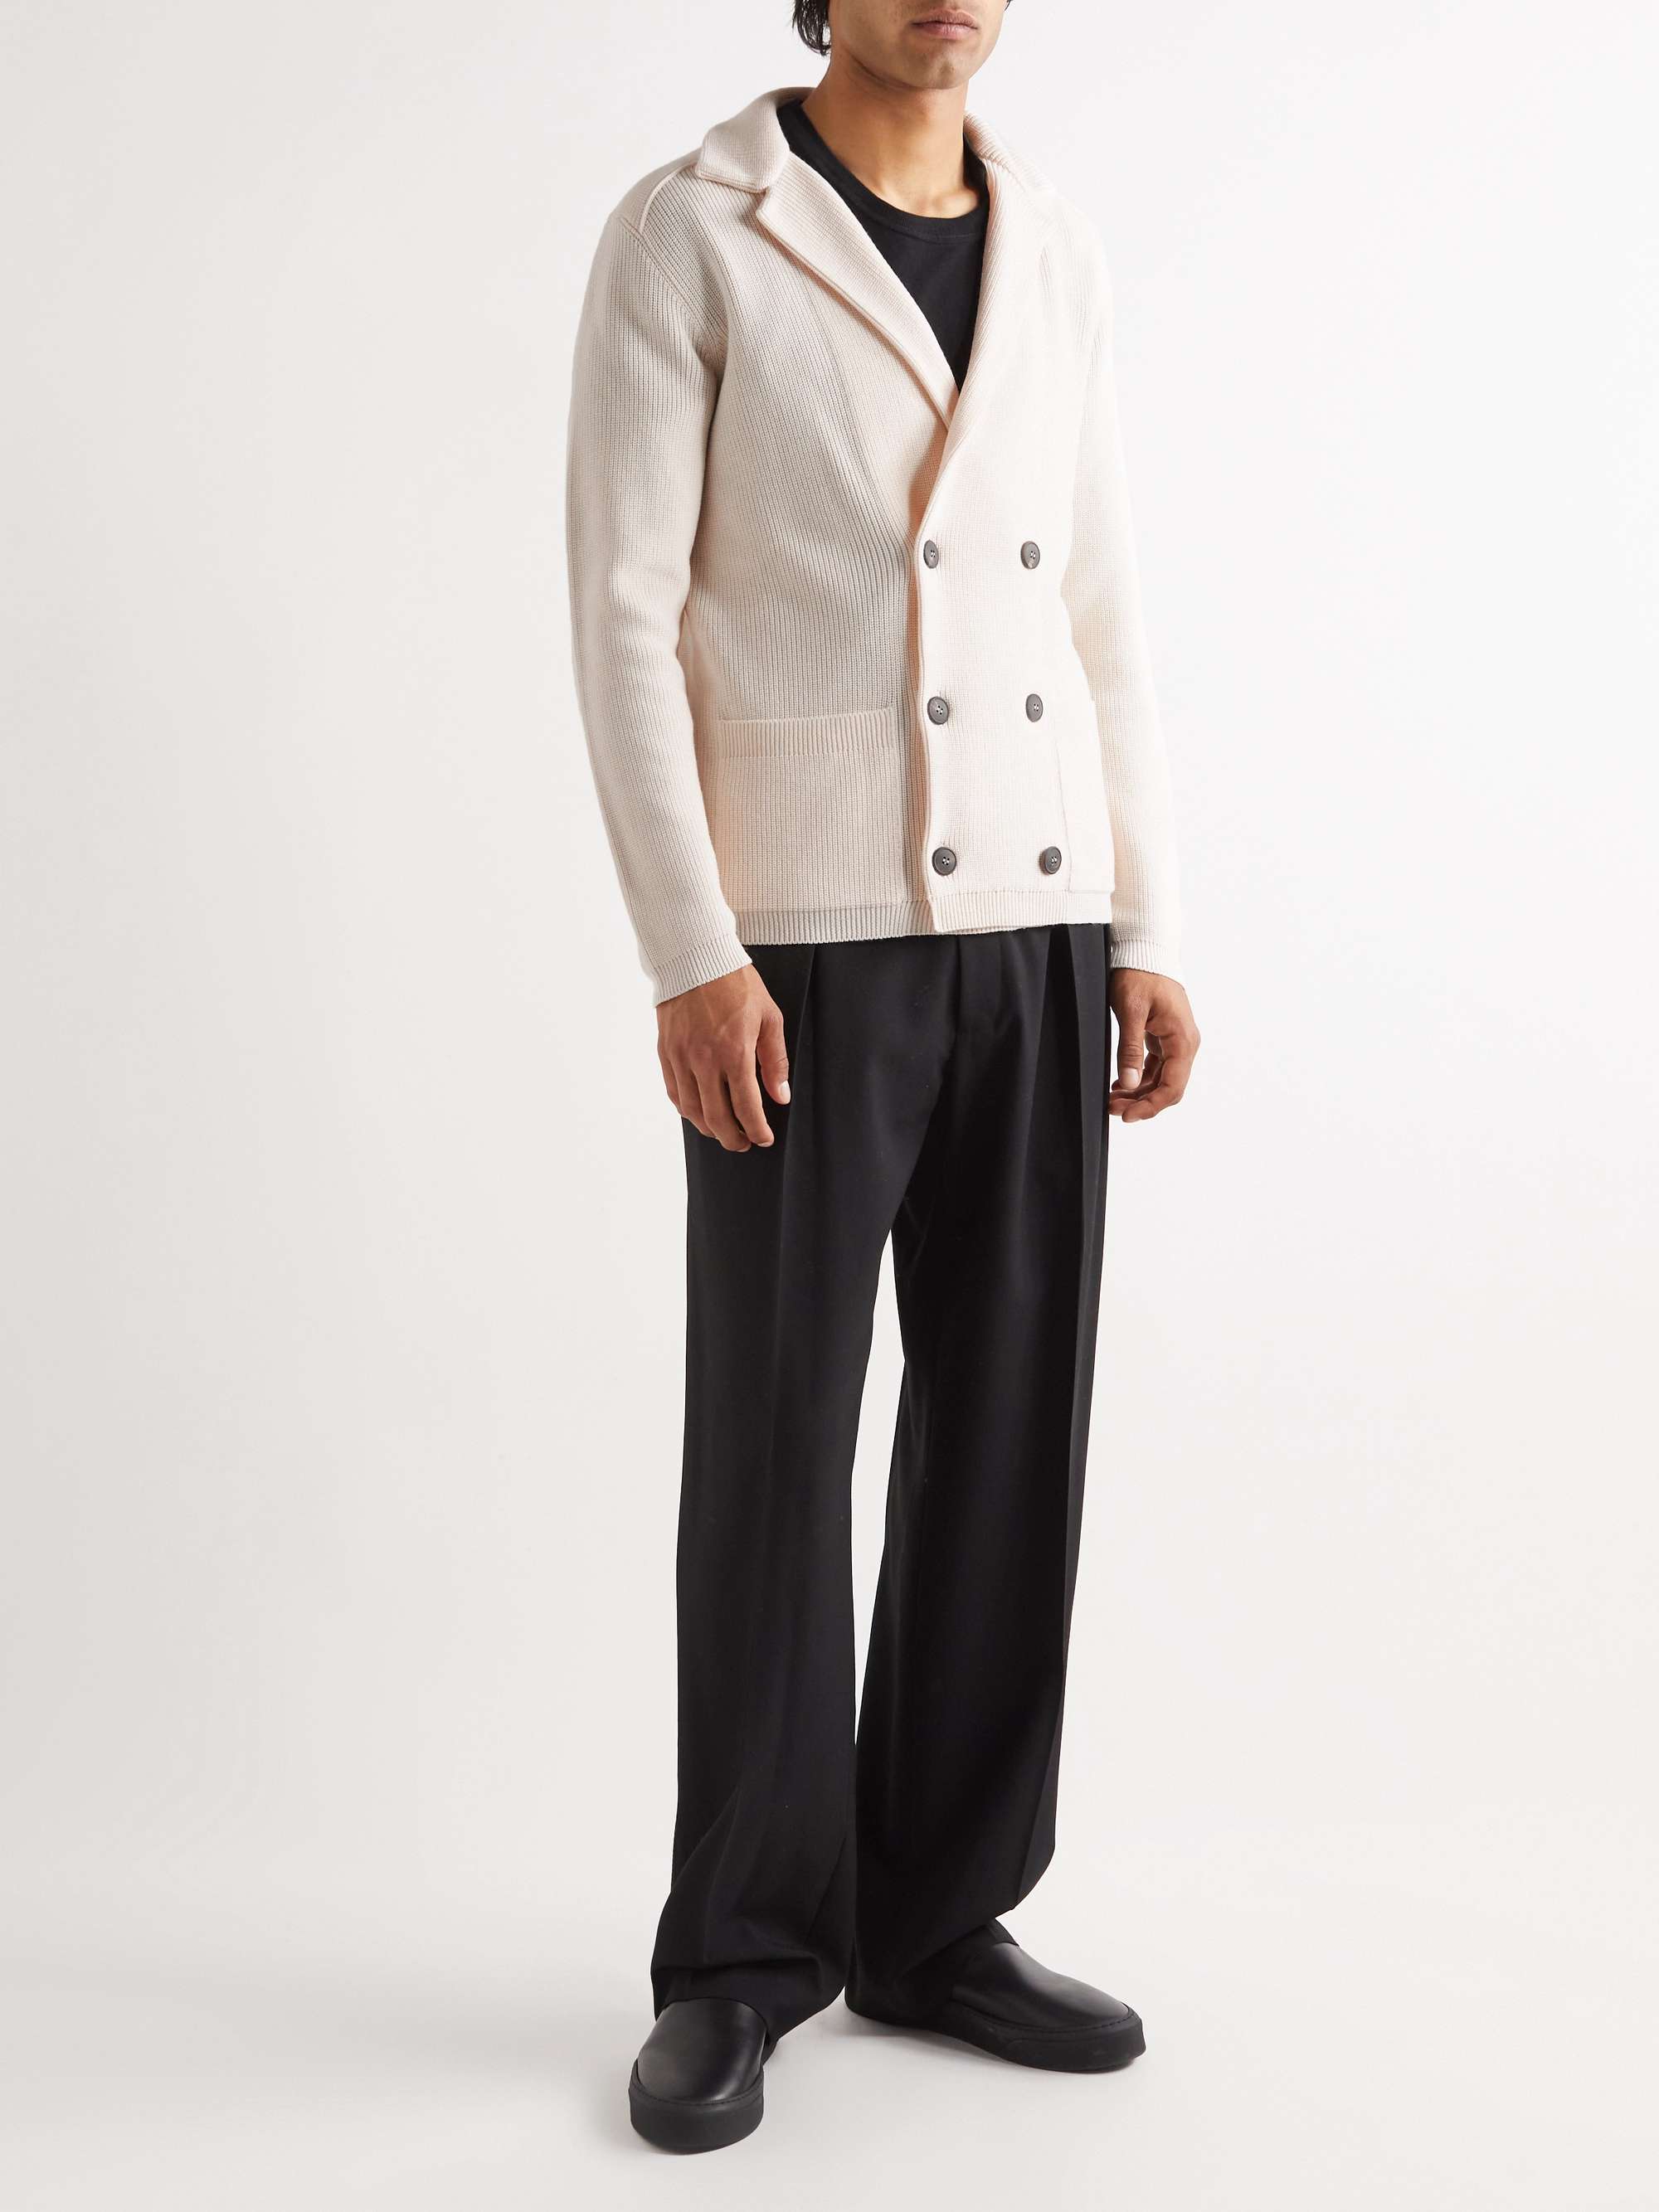 GIORGIO ARMANI Double-Breasted Wool and Cotton-Blend Cardigan